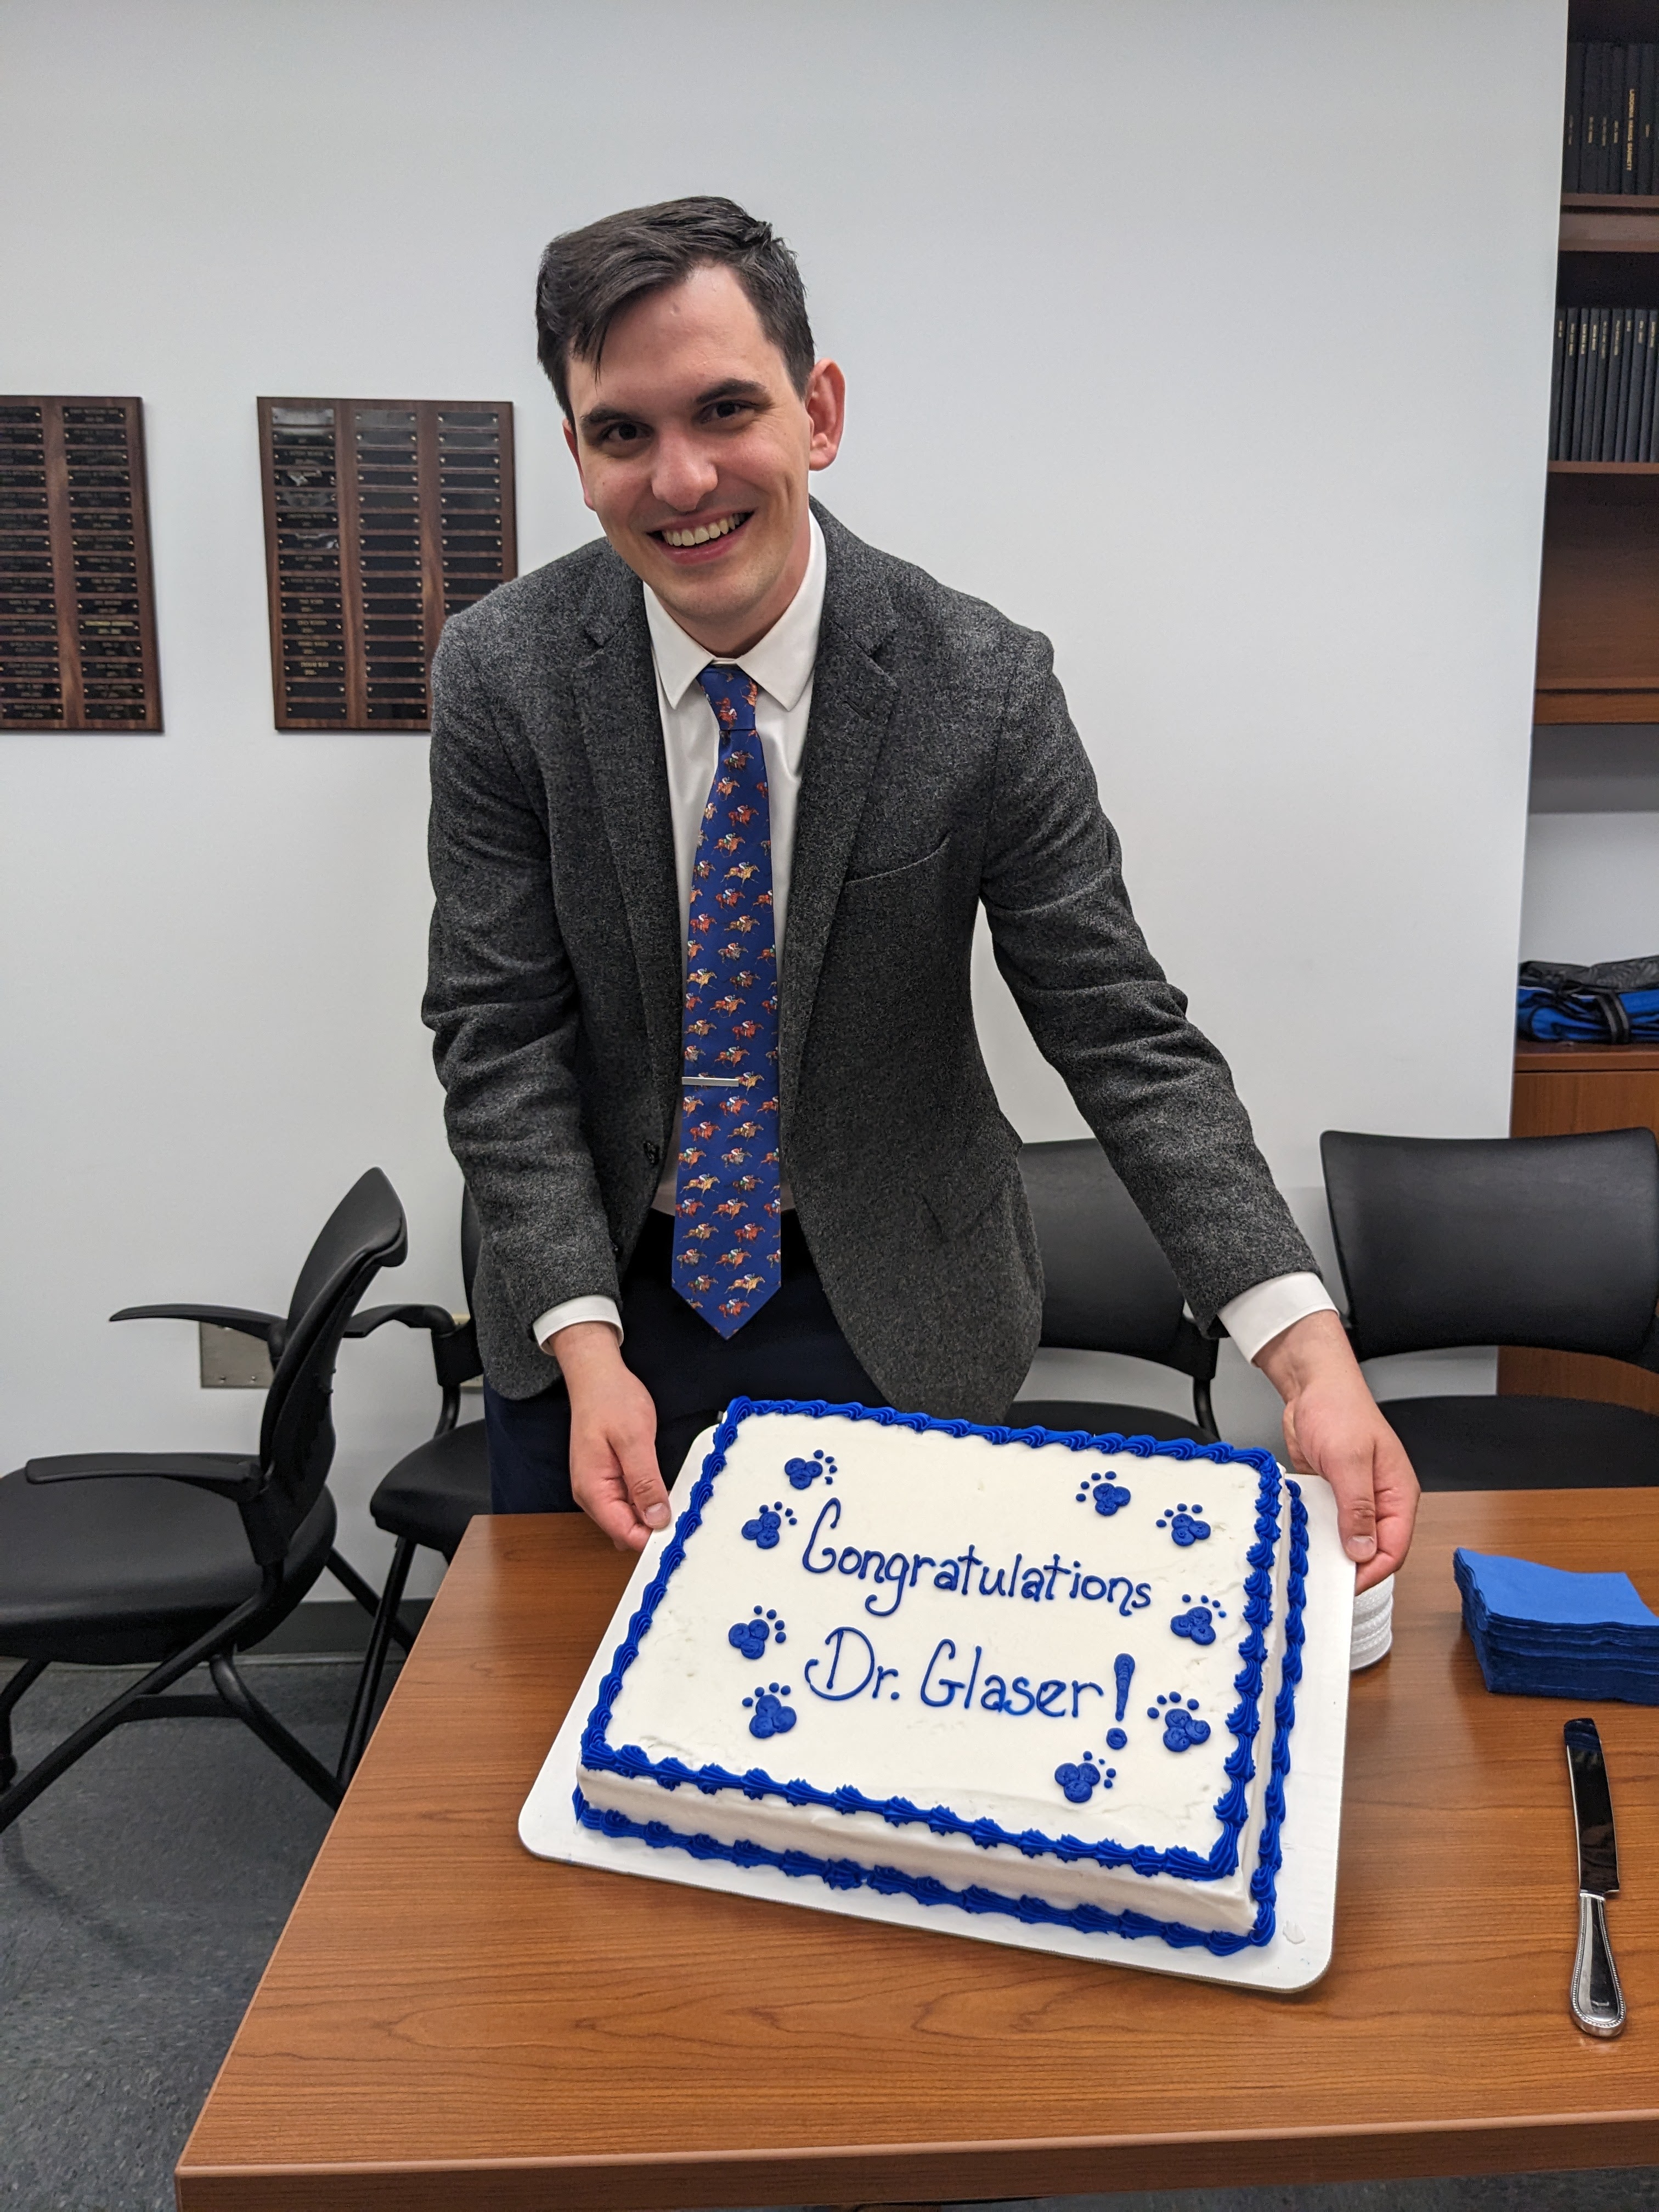 Ethan Glaser holding a cake that says "Congratulations Dr Glaser!"